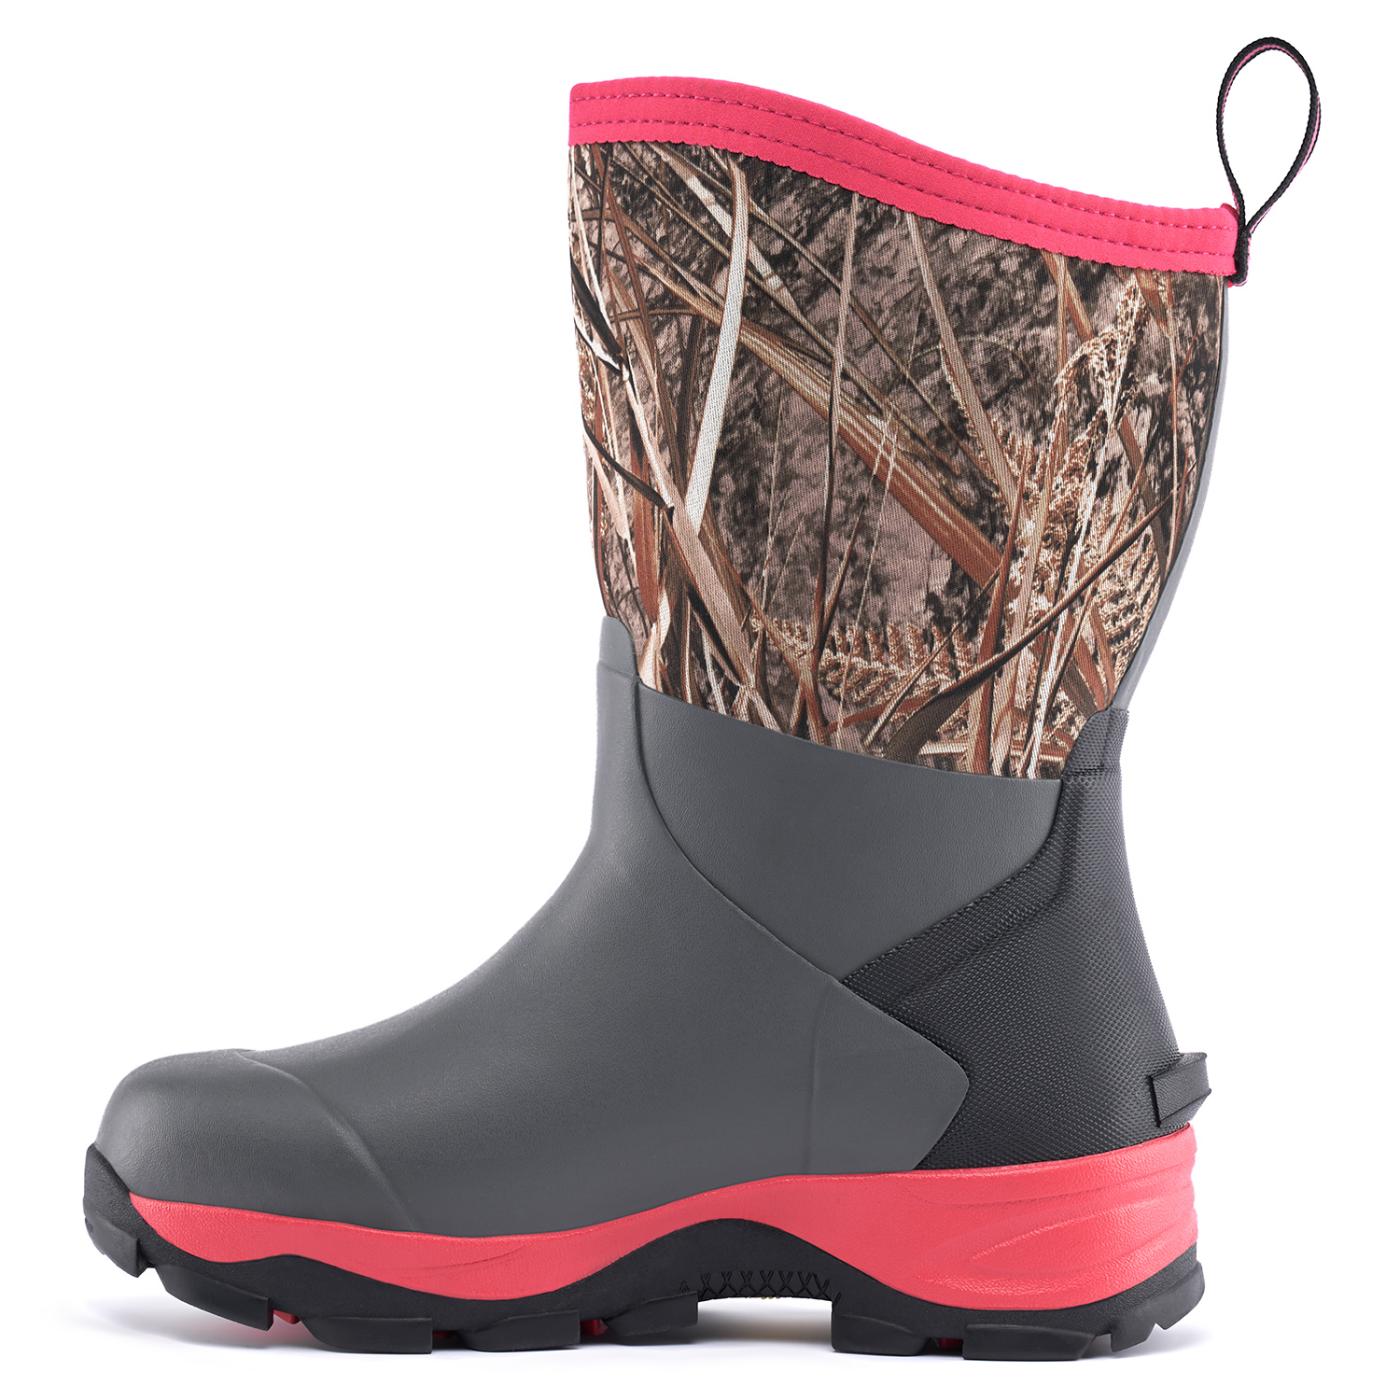 Trudave Mid Calf Garden Boots for Women-Pink